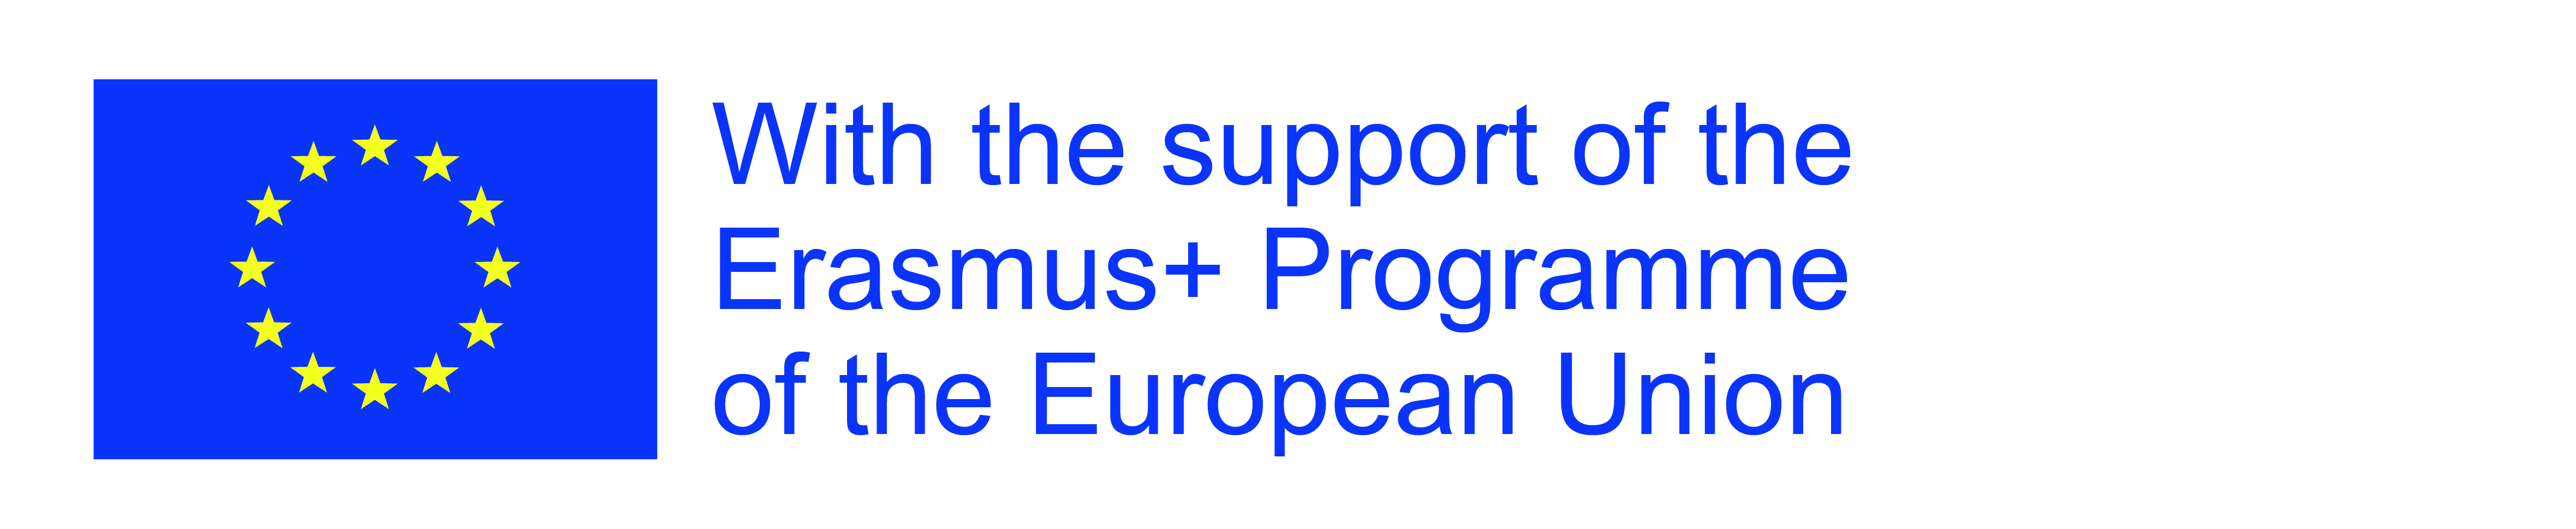 european flag with text: With the support of the Erasmus+ Programme of the European Union.